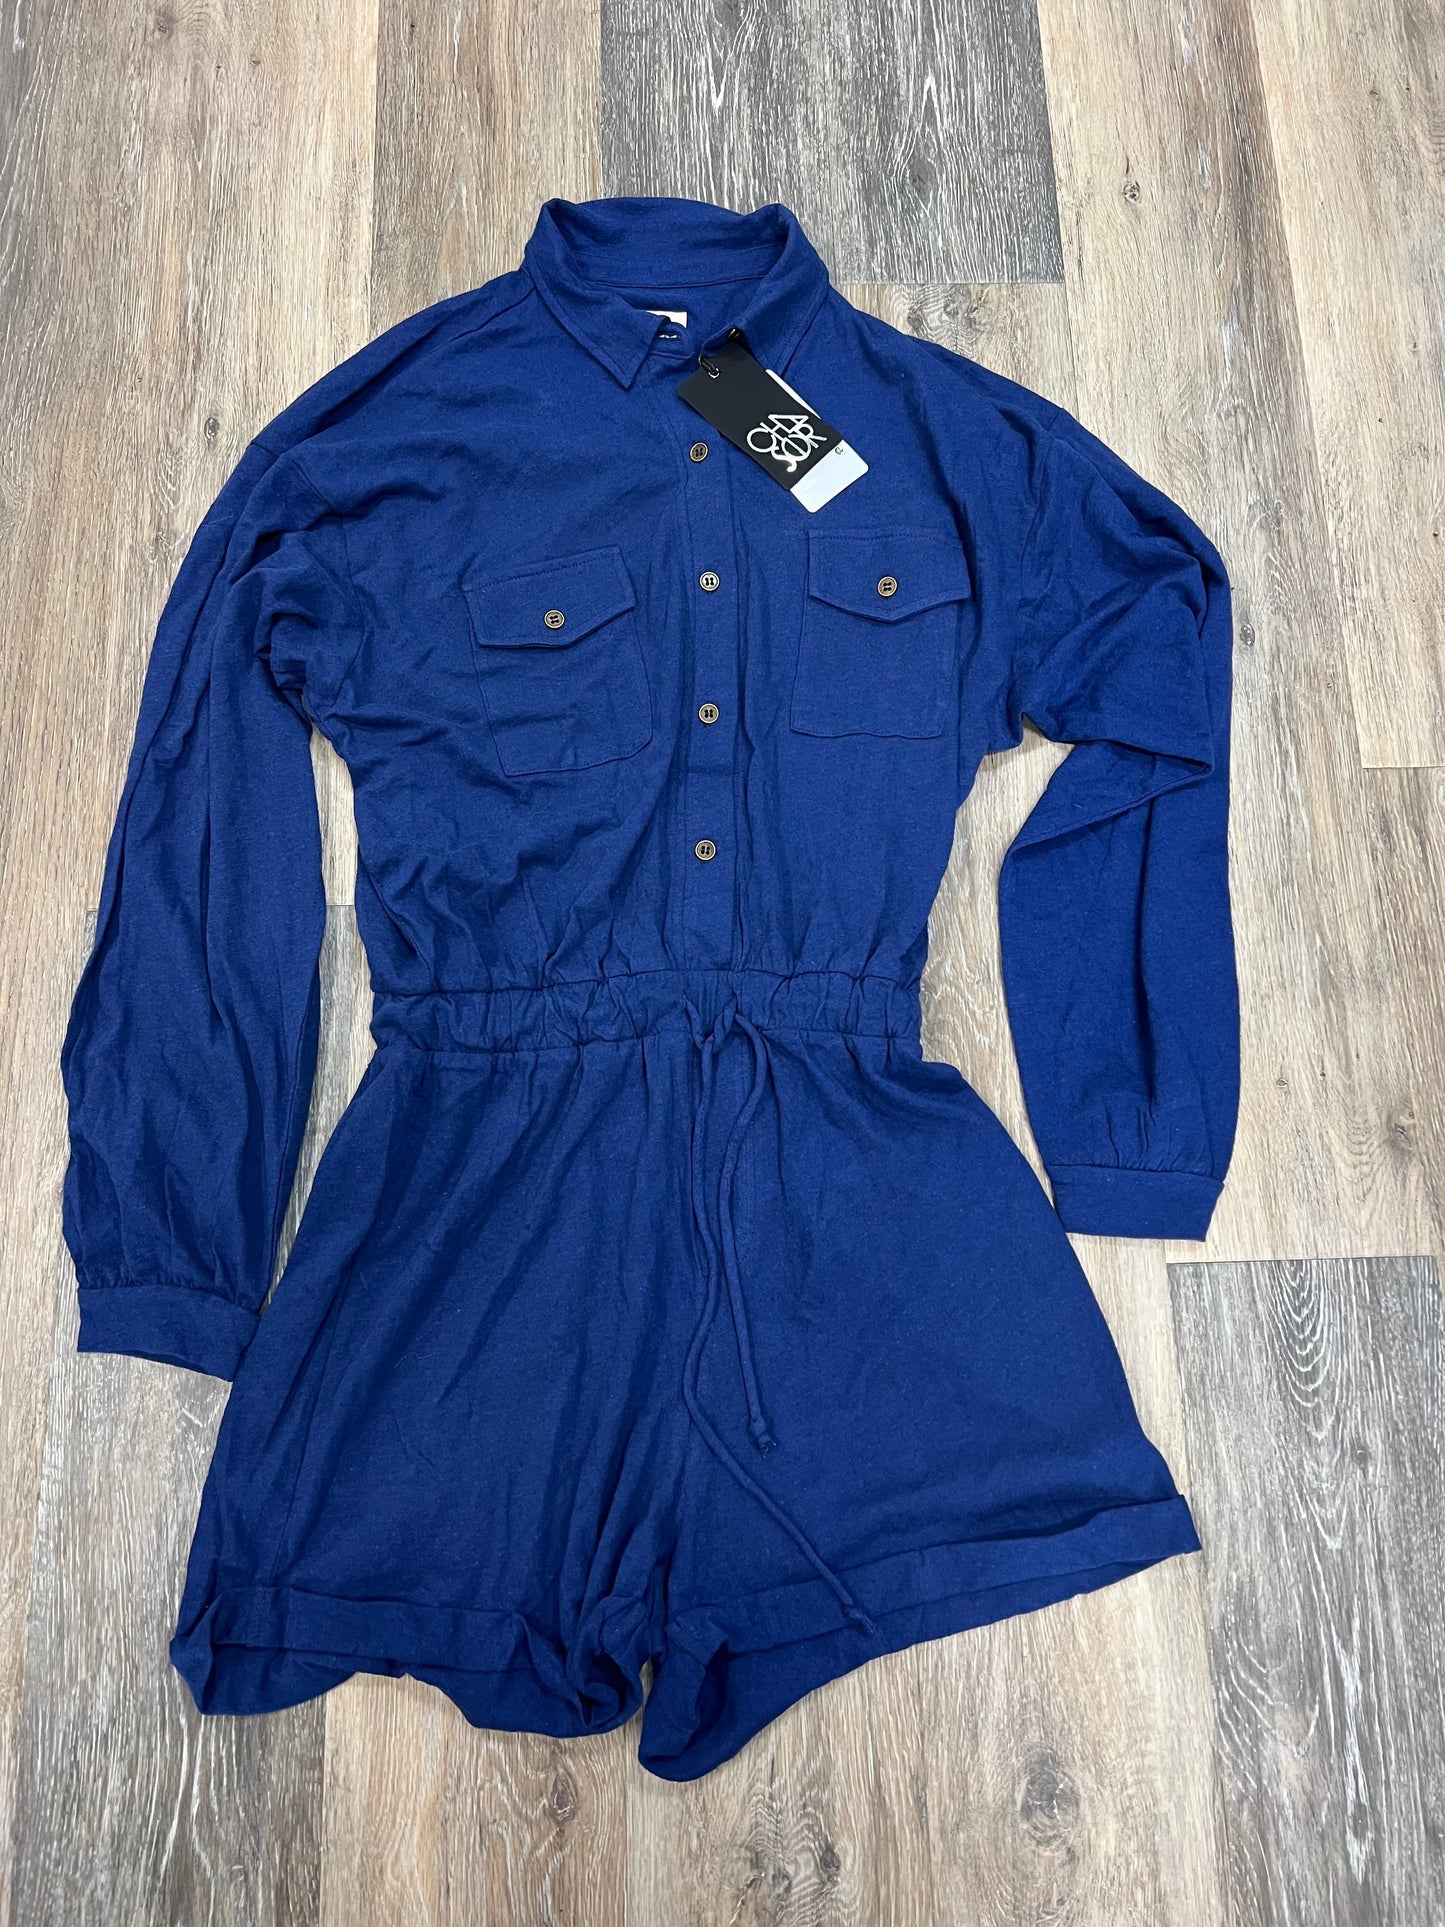 Blue Romper Chaser, Size Xs